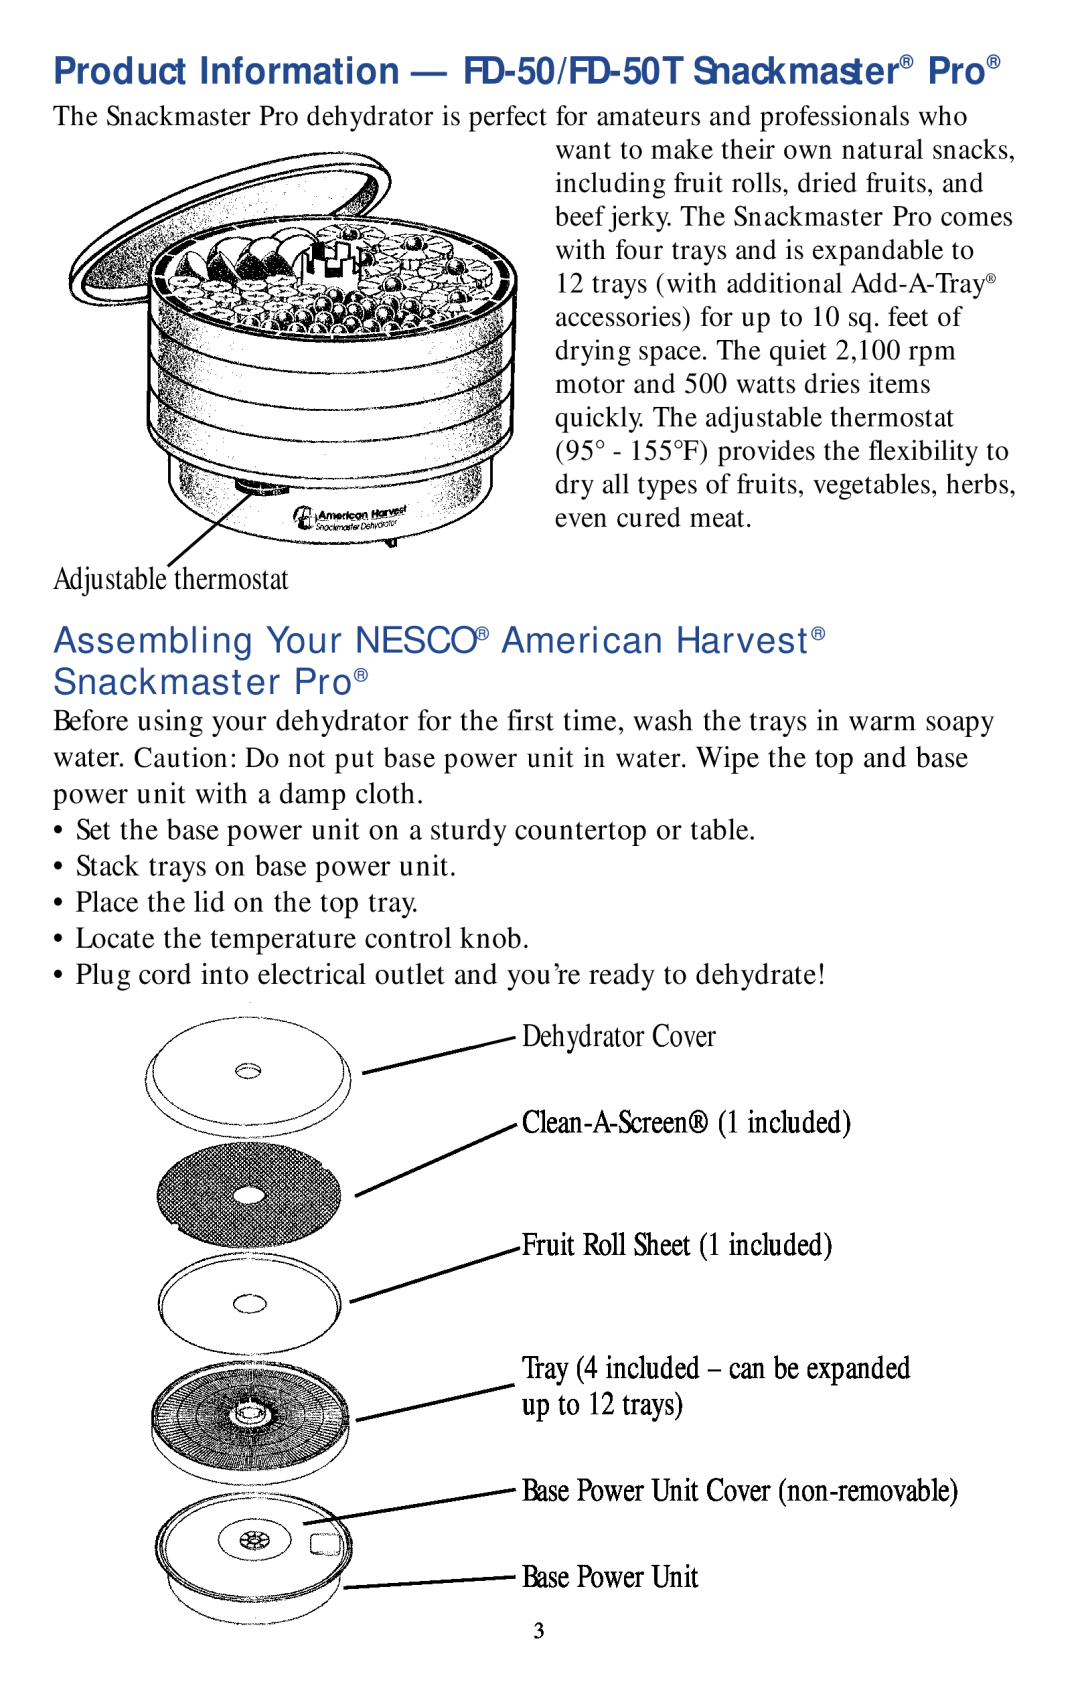 Nesco Food Dehydrator manual Product Information - FD-50/FD-50T Snackmaster Pro, Adjustable thermostat 